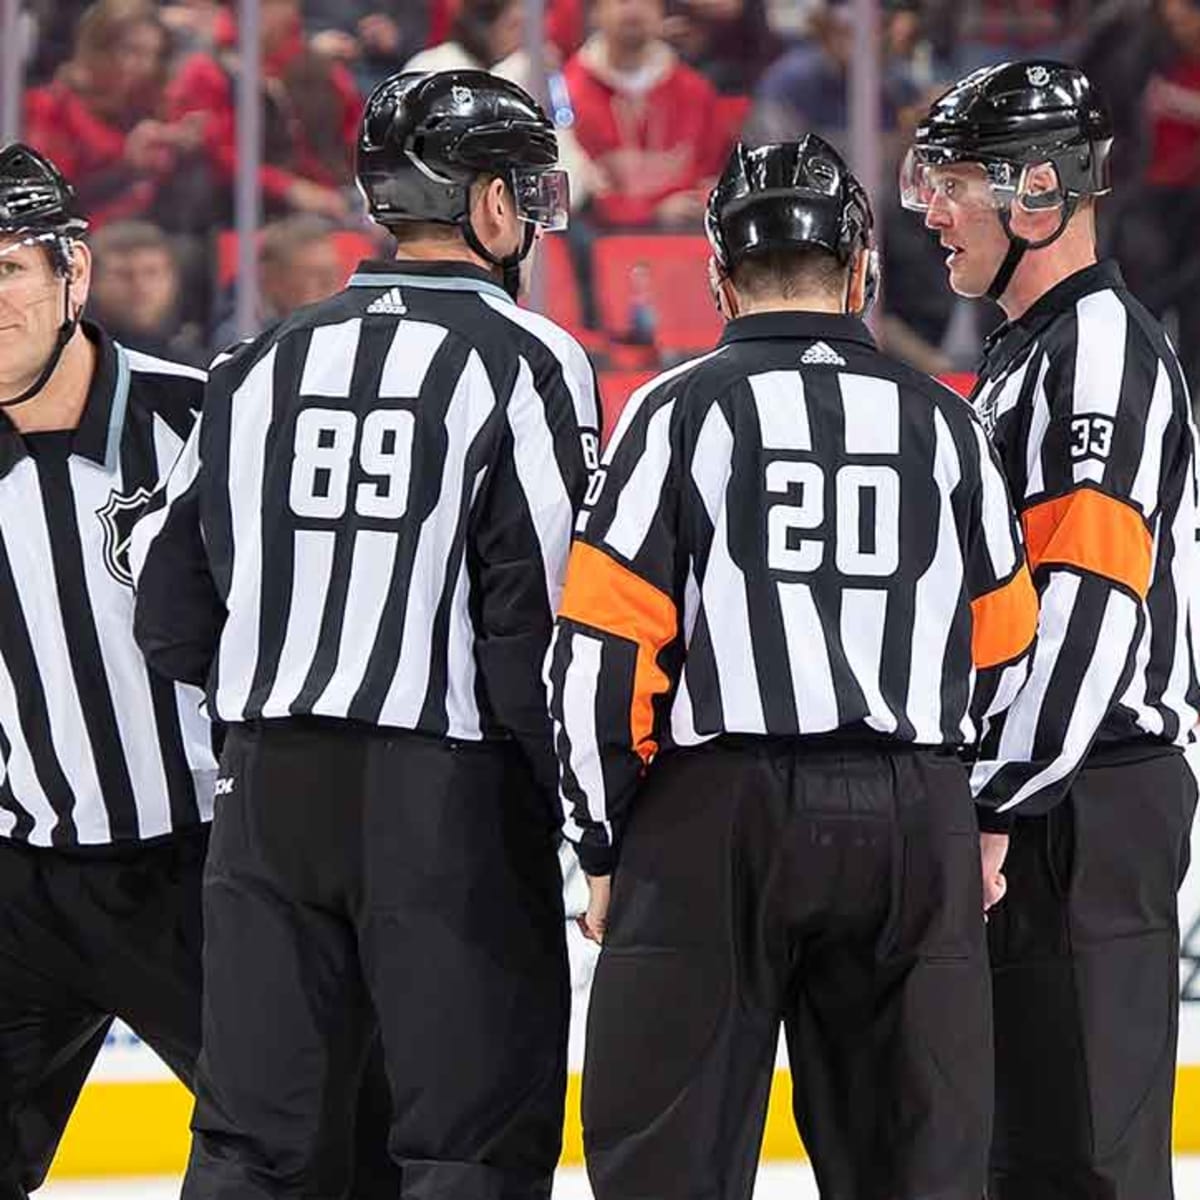 NHL referees to open up training camp this weekend - NBC Sports